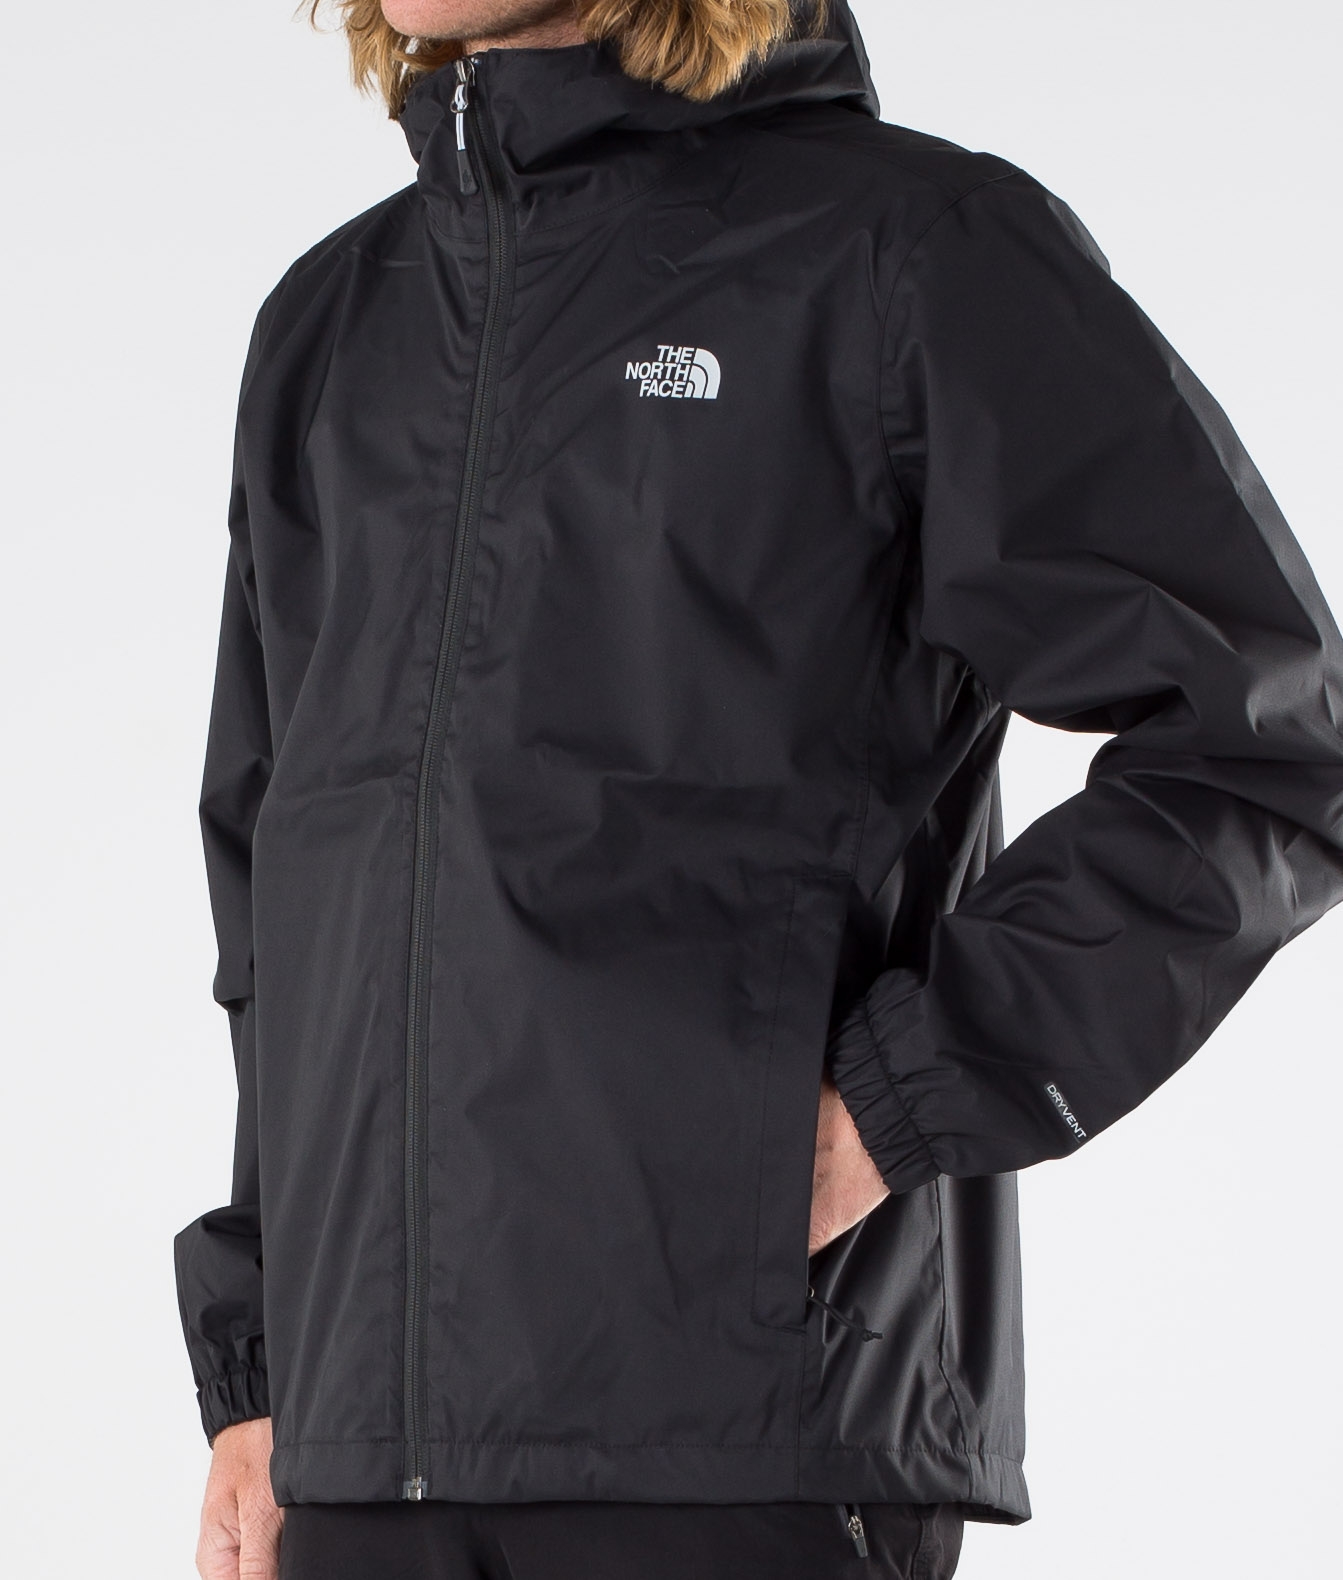 north face dryvent jacket